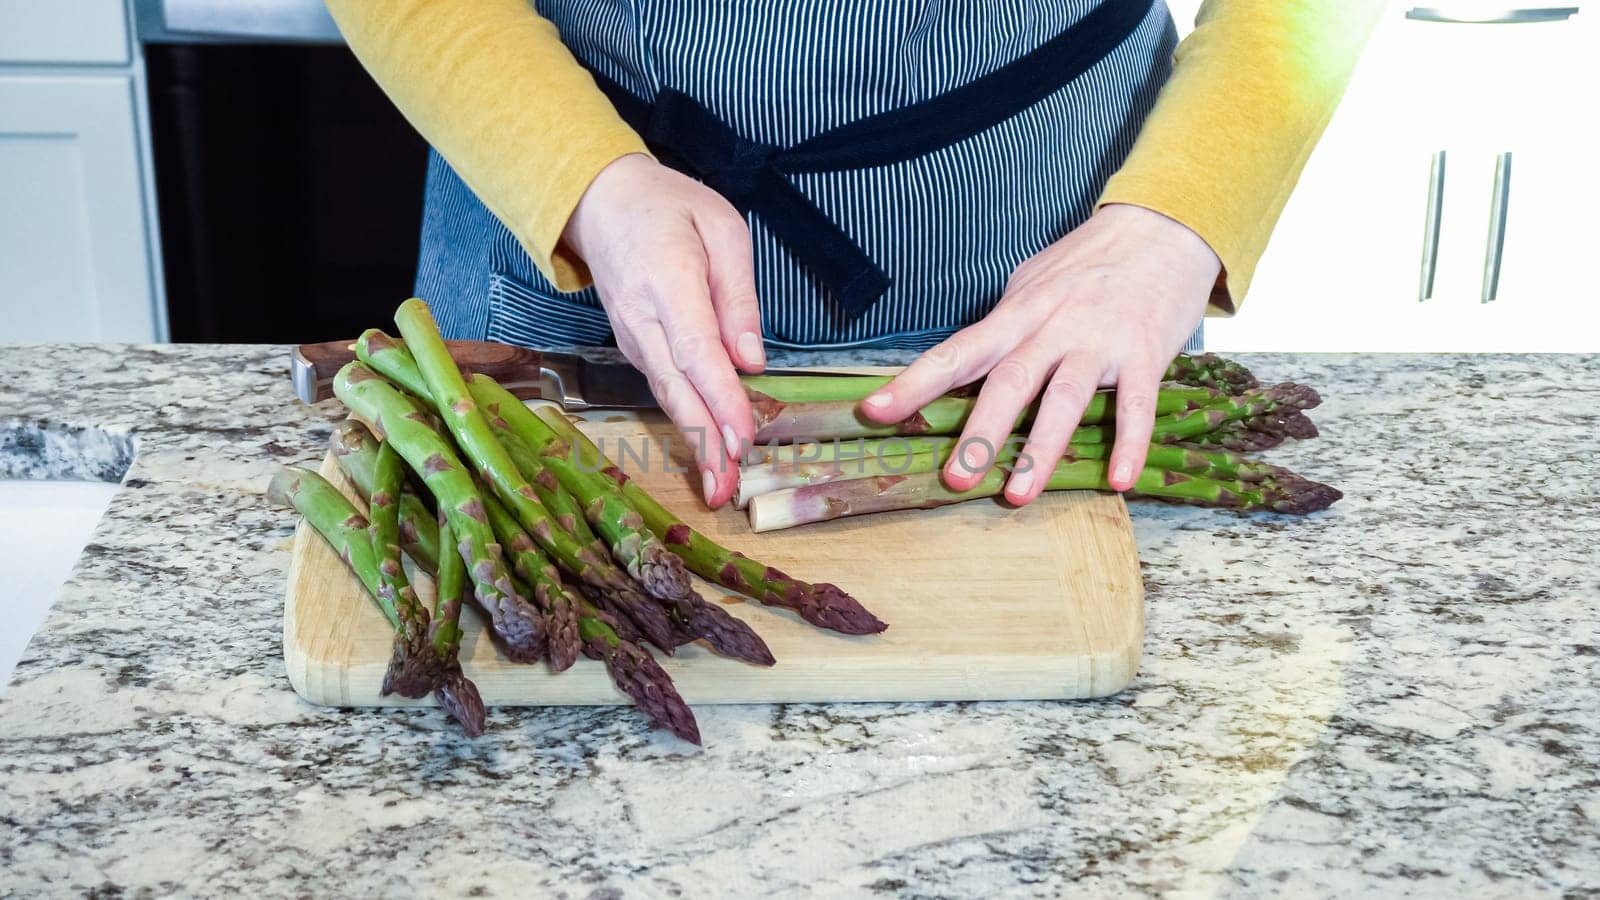 Large organic asparagus stalks are being sliced in a modern white kitchen, in preparation for steaming.